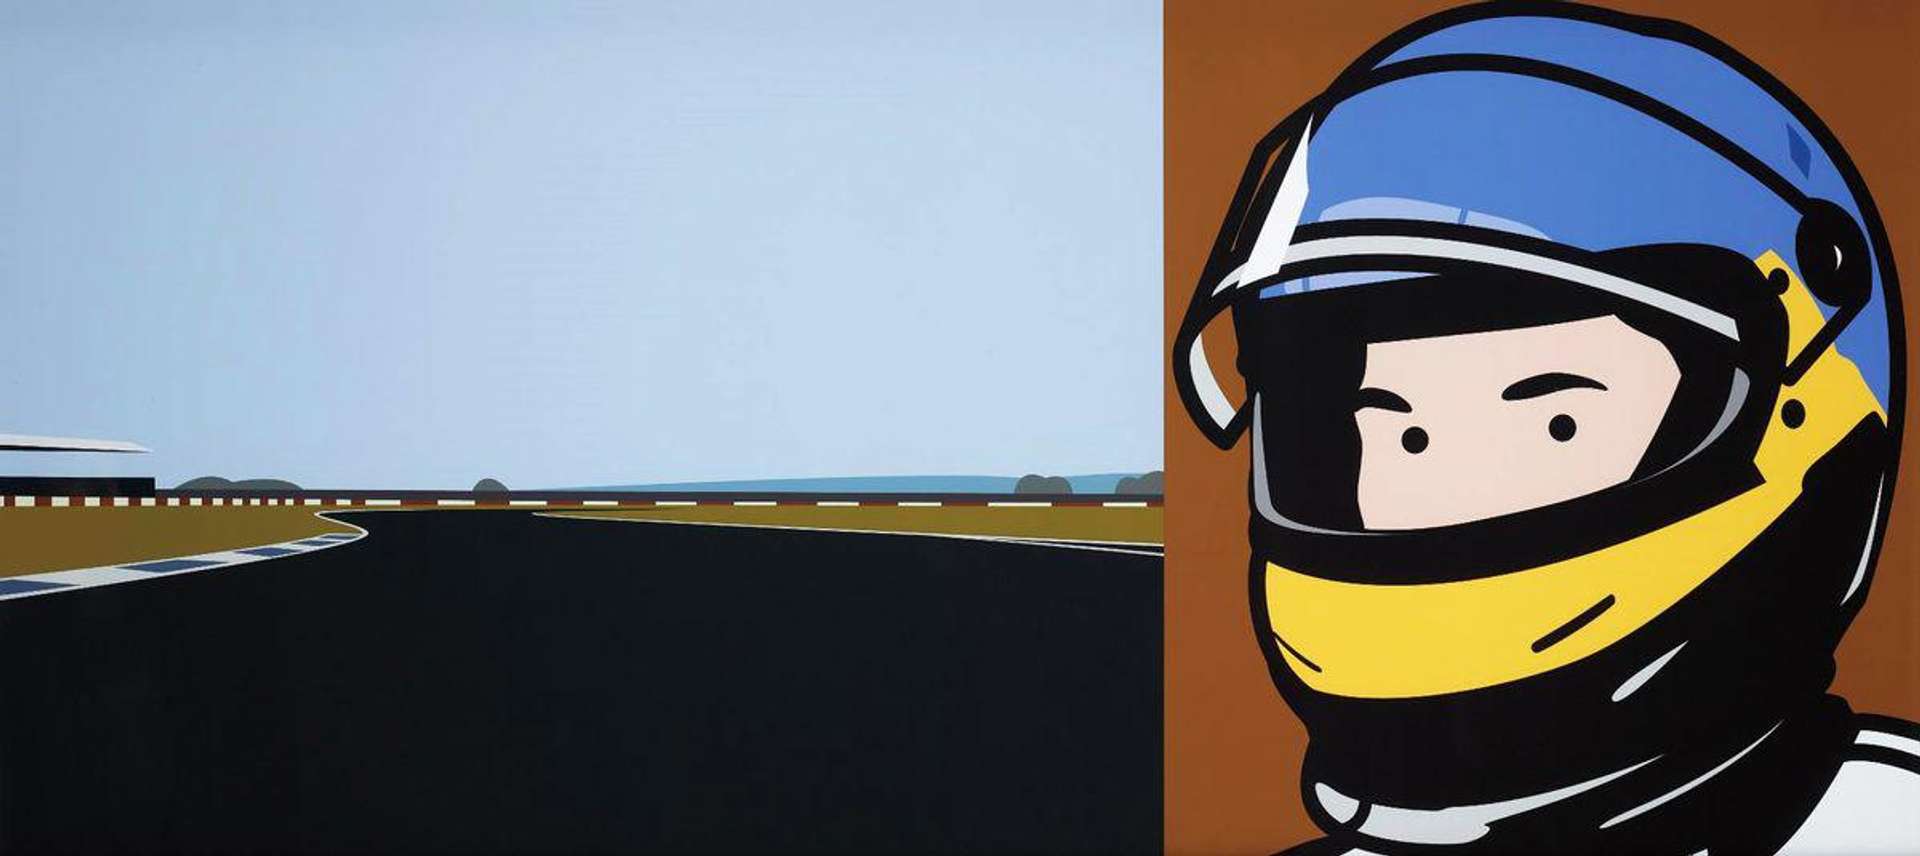 Imagine you are driving (fast) / Jacques / Helmet by Julian Opie